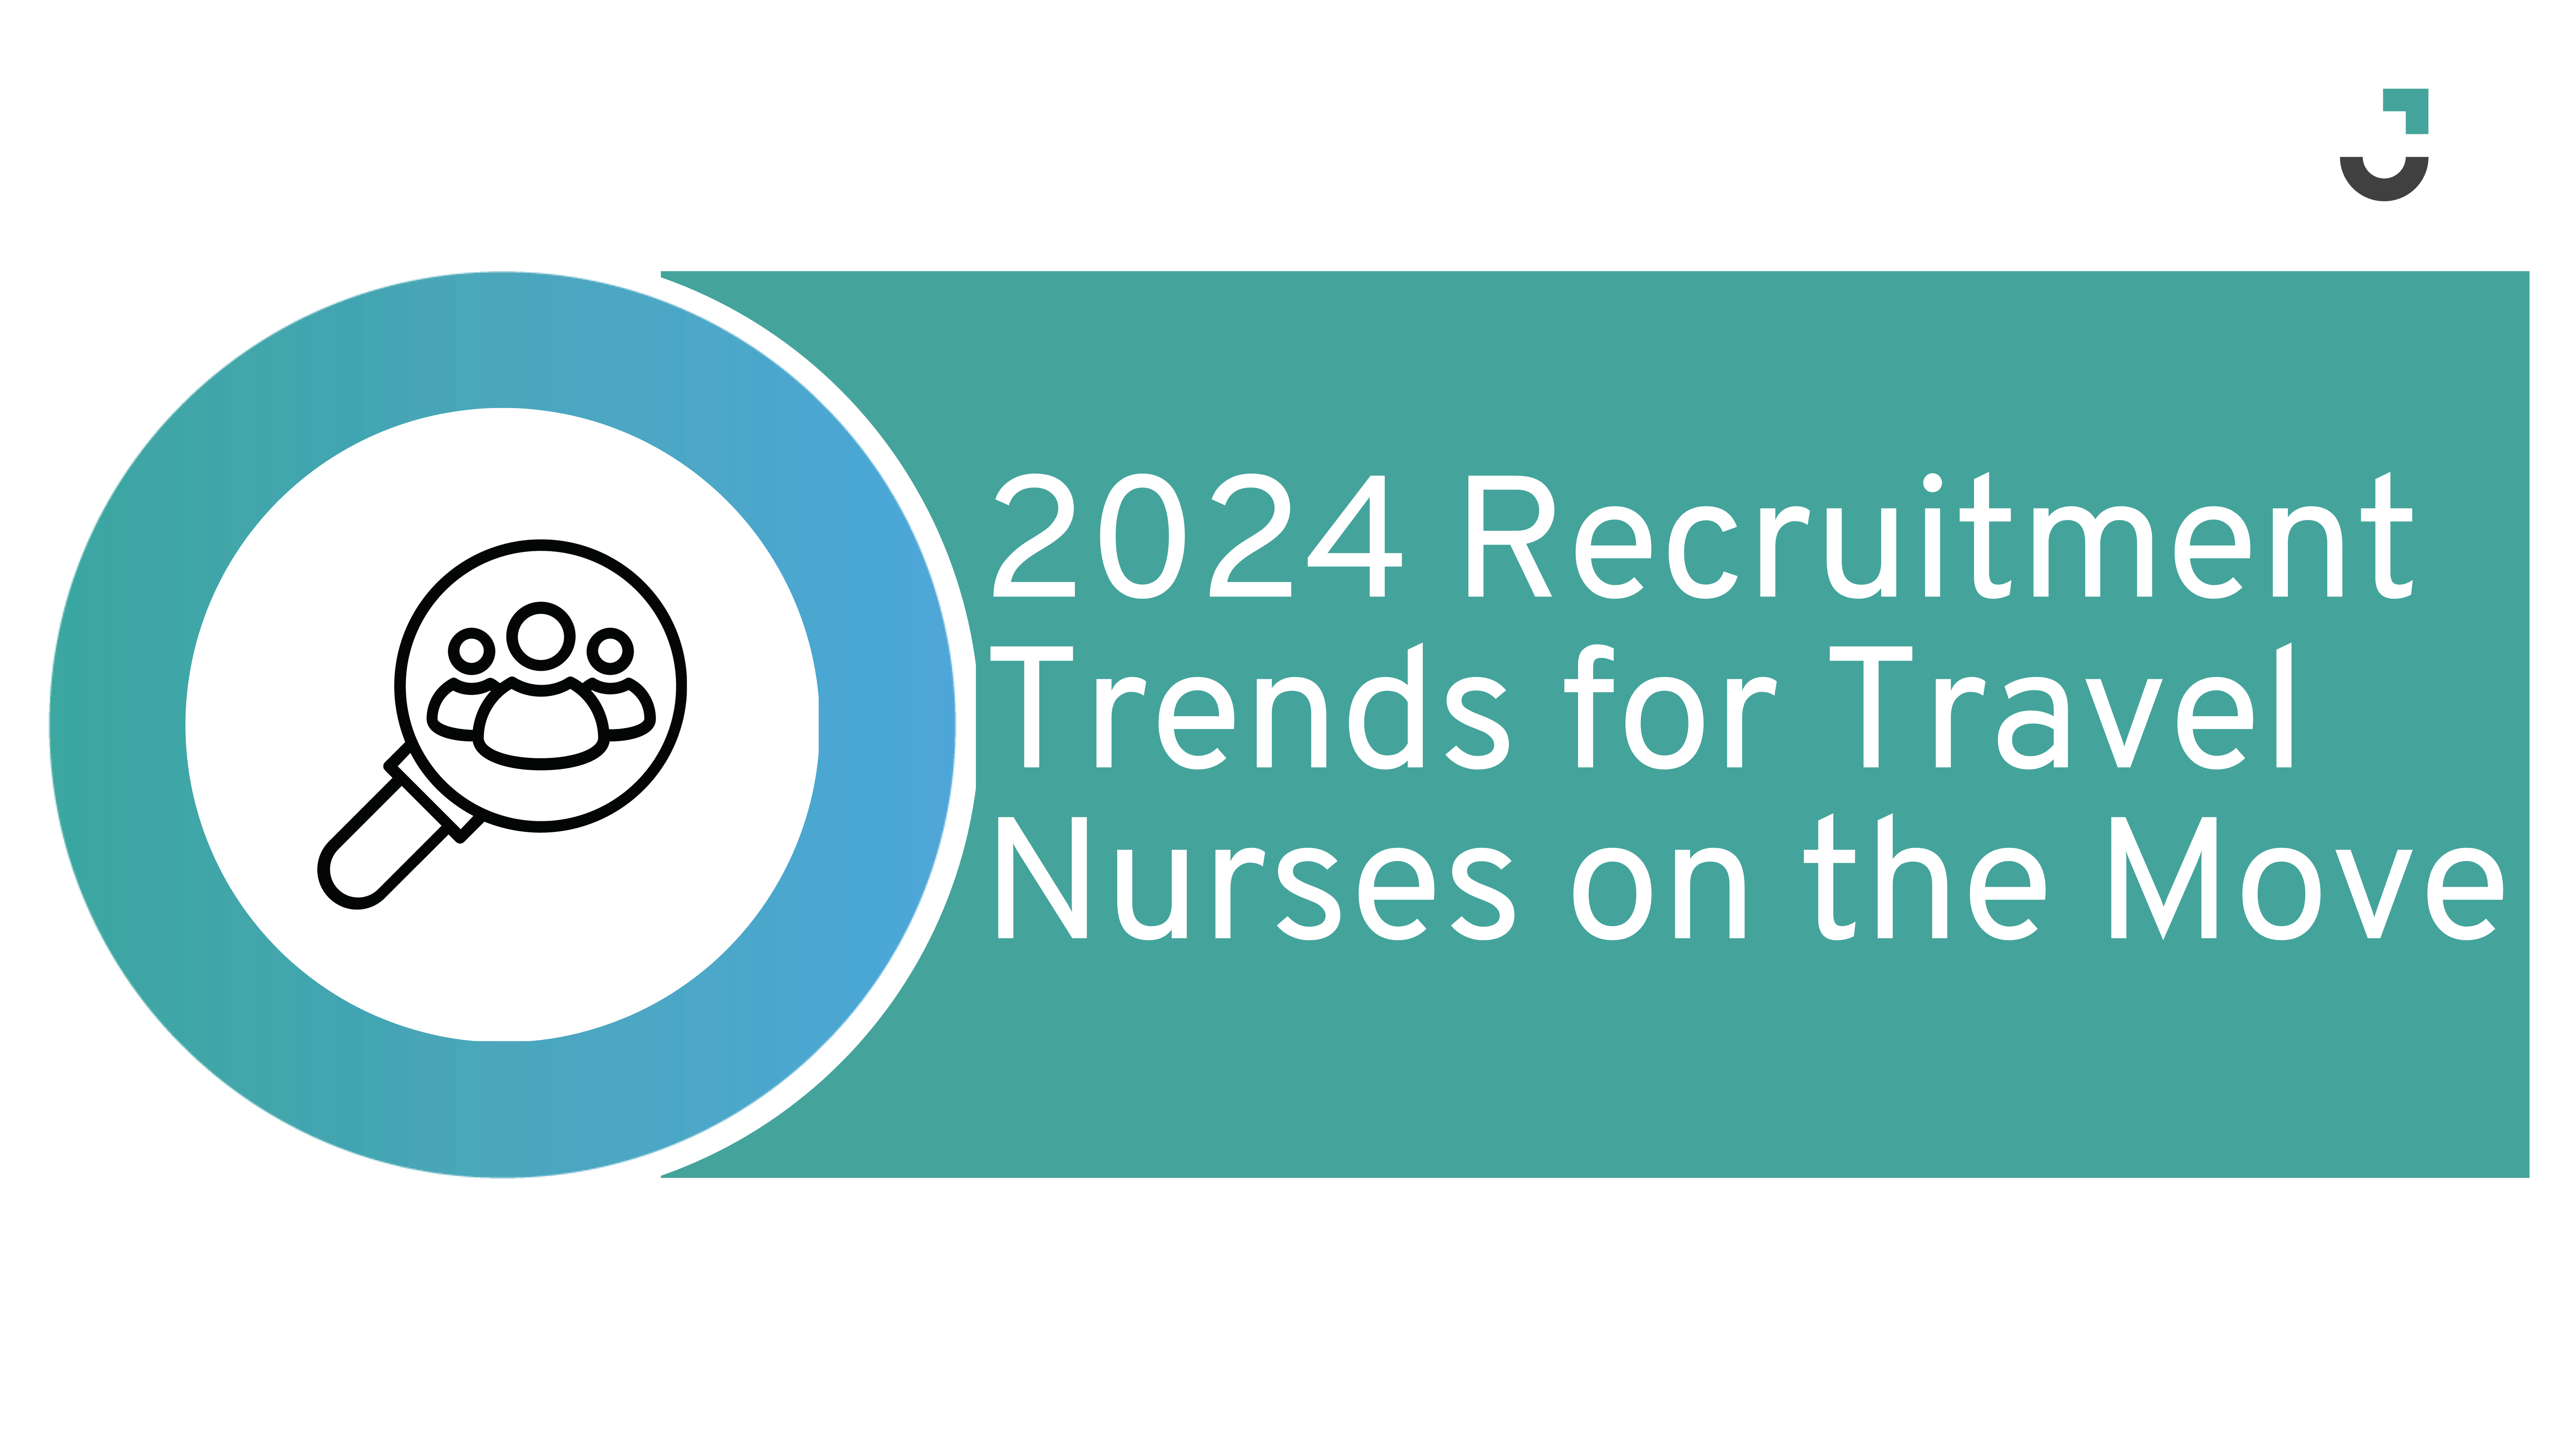 2024 Recruitment Trends for Travel Nurses on the Move